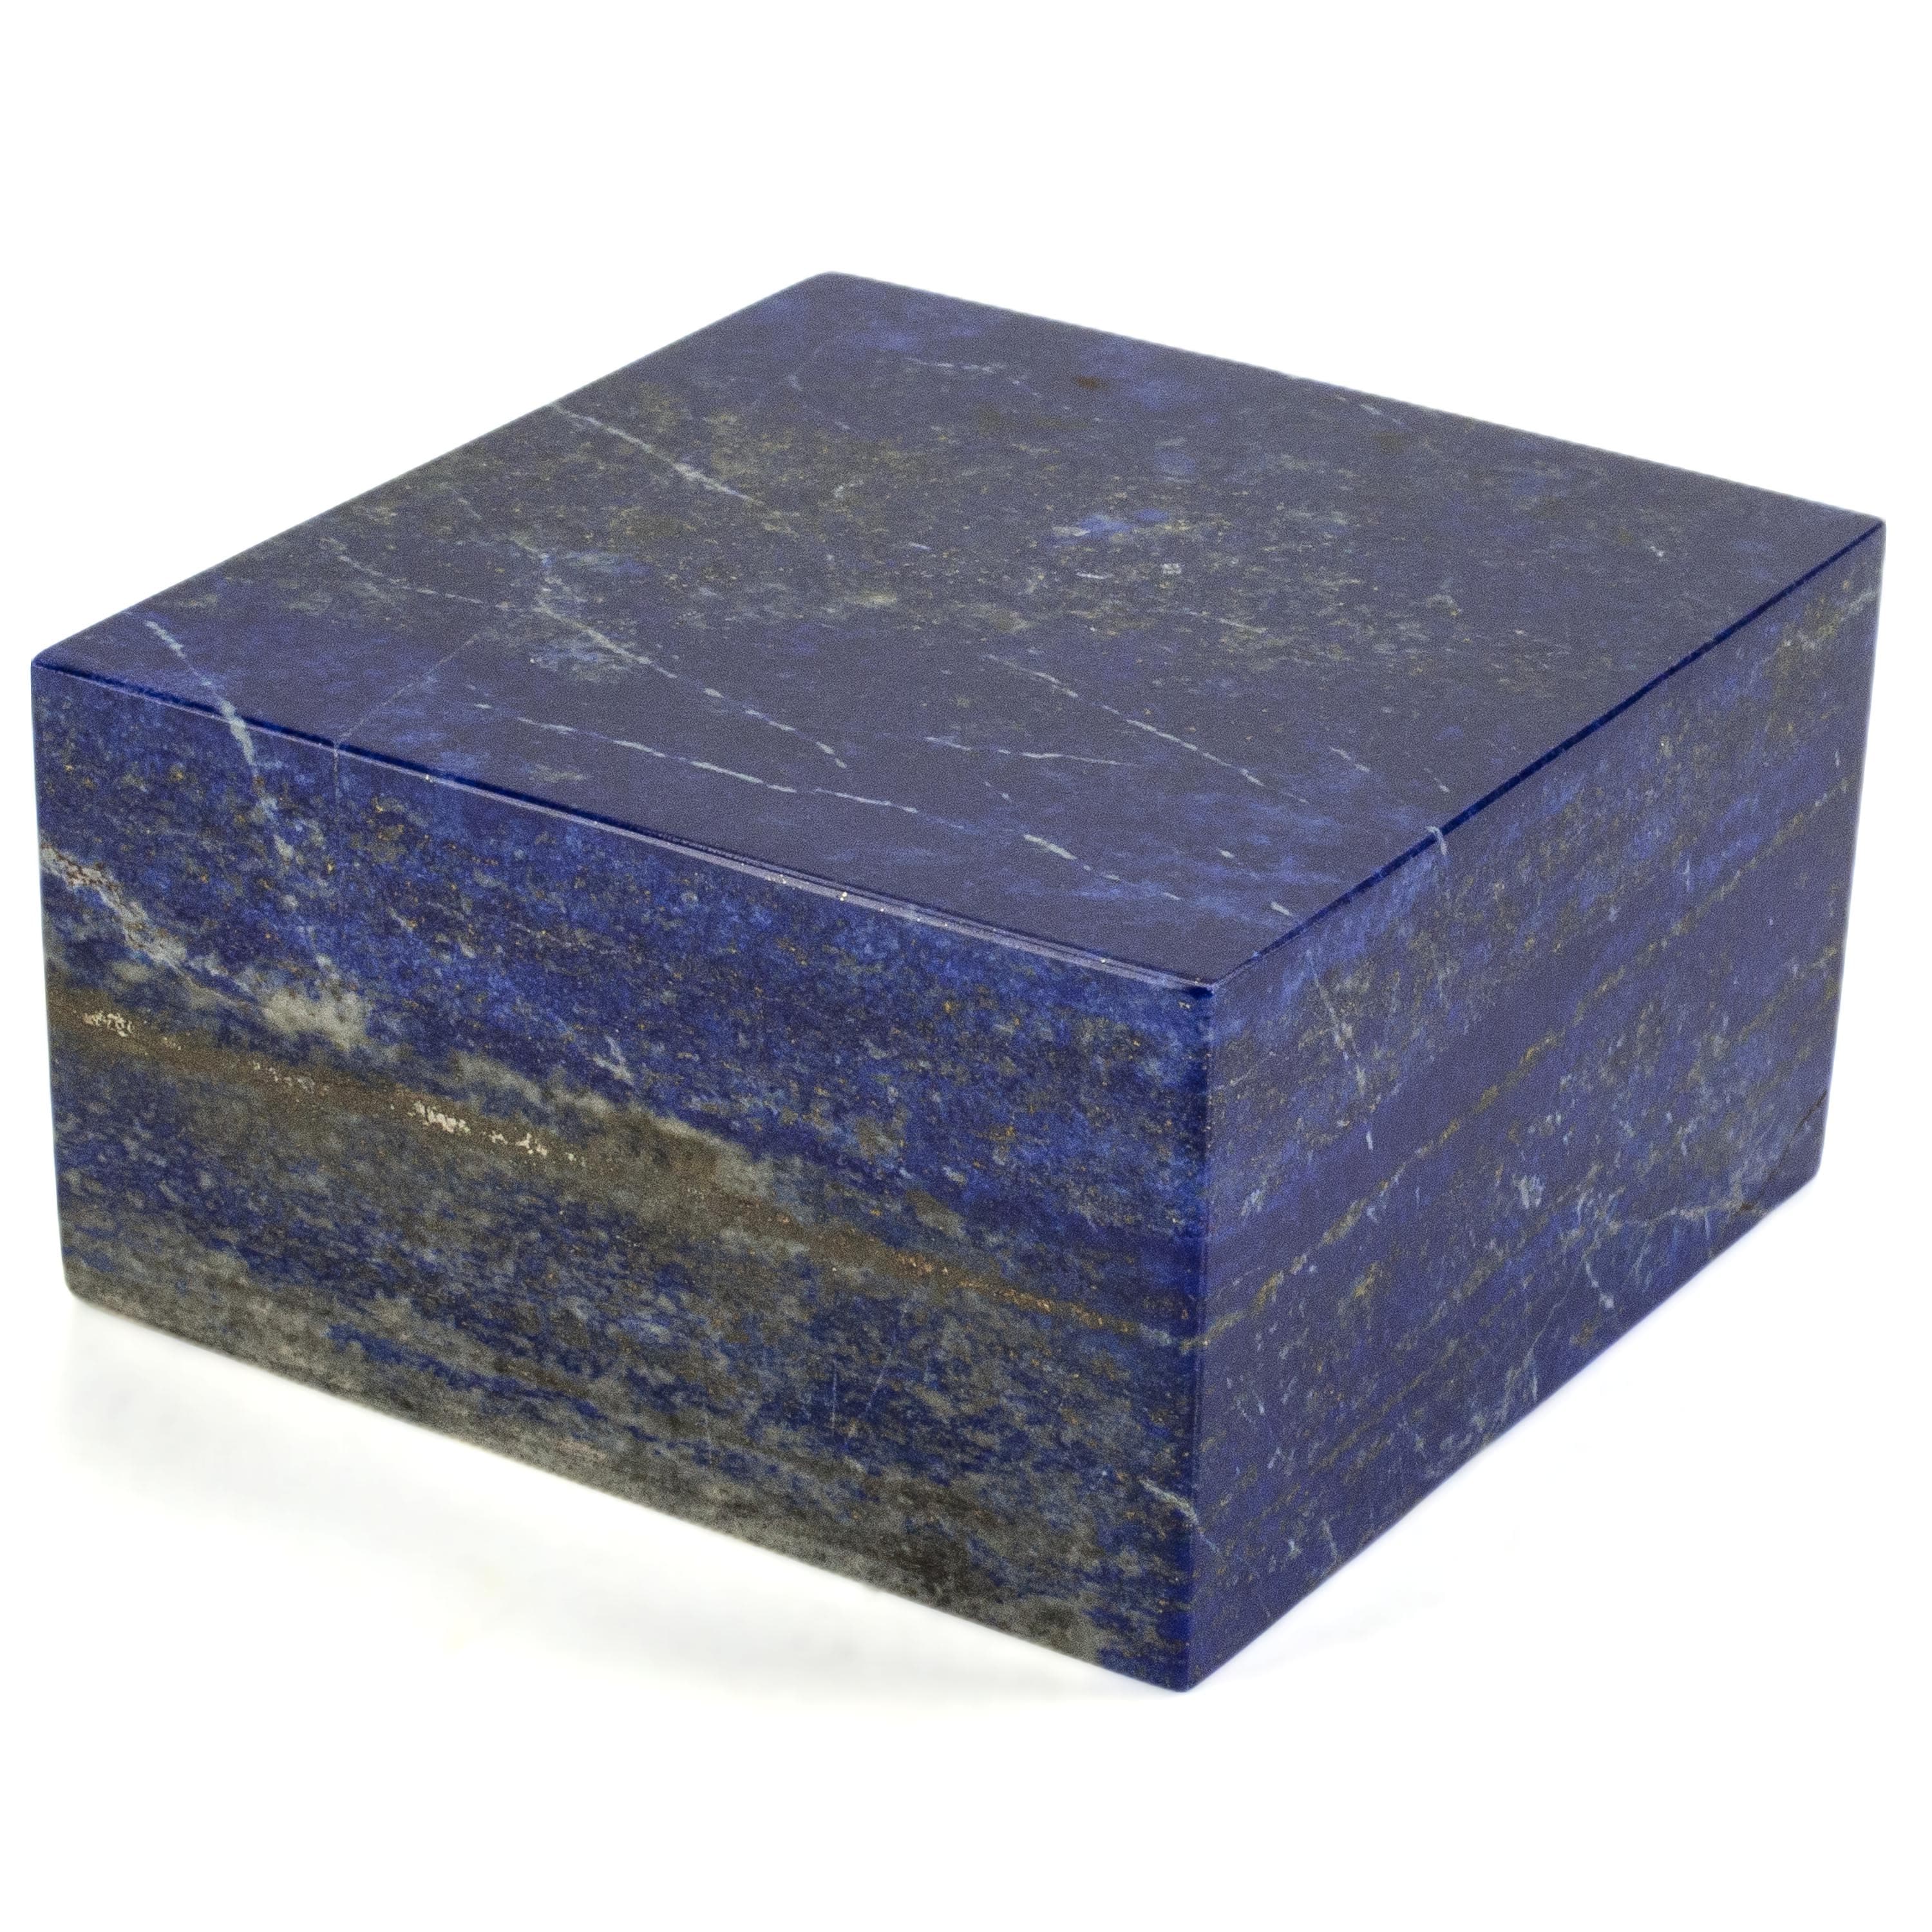 Kalifano Lapis Lapis Lazuil Freeform from Afghanistan - 875 g / 1.9 lbs LP1000.003